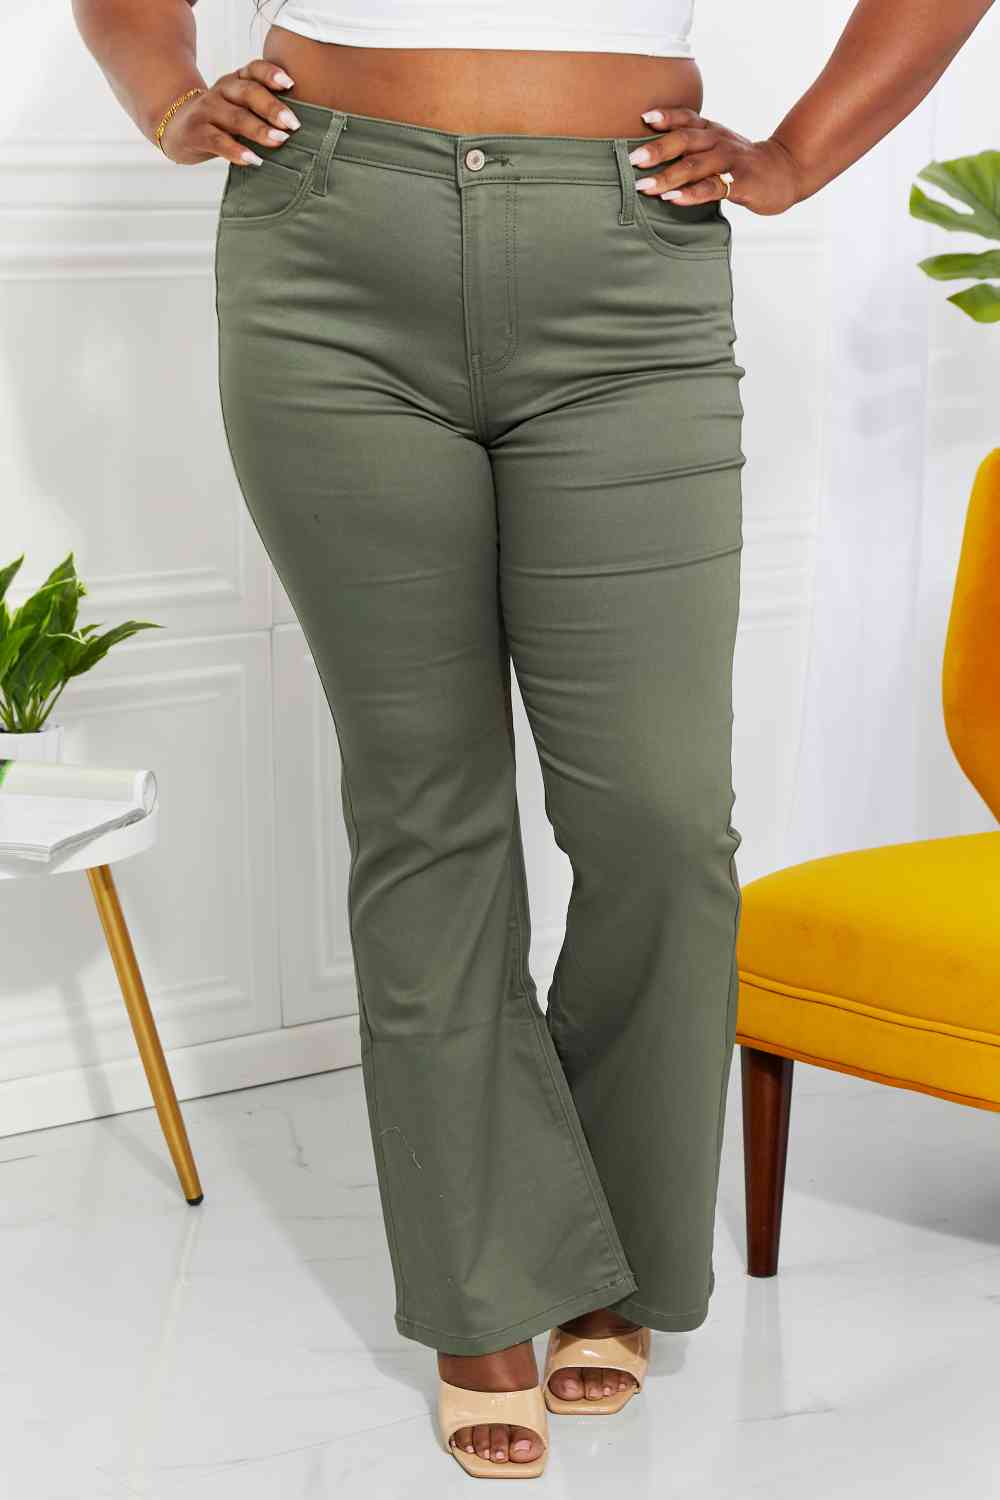 Zenana Clementine Full Size High-Rise Bootcut Jeans in Olive - Bellisima Clothing Collective